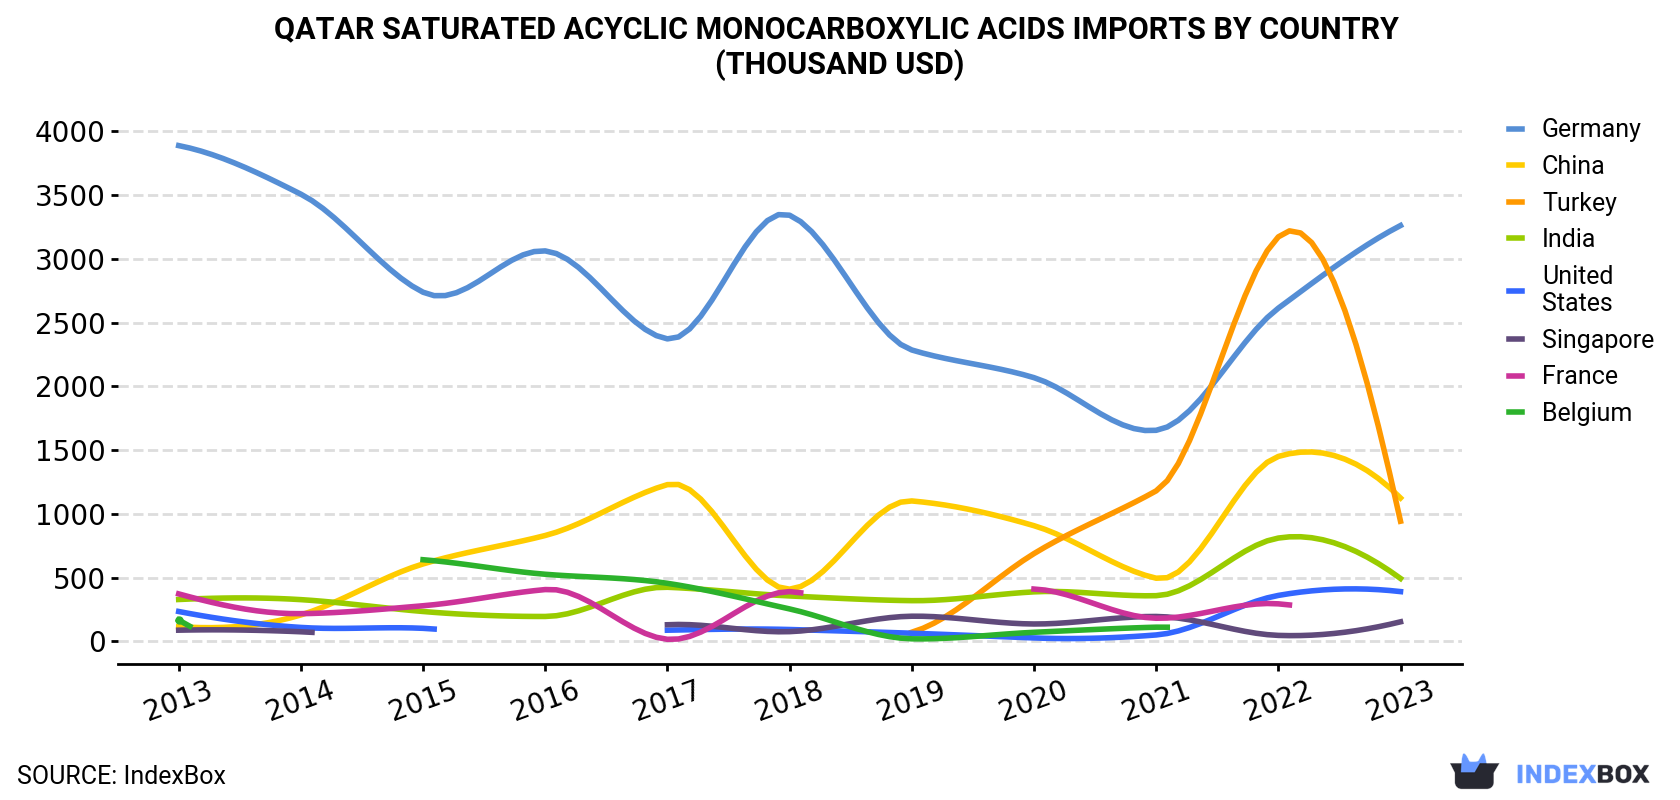 Qatar Saturated Acyclic Monocarboxylic Acids Imports By Country (Thousand USD)